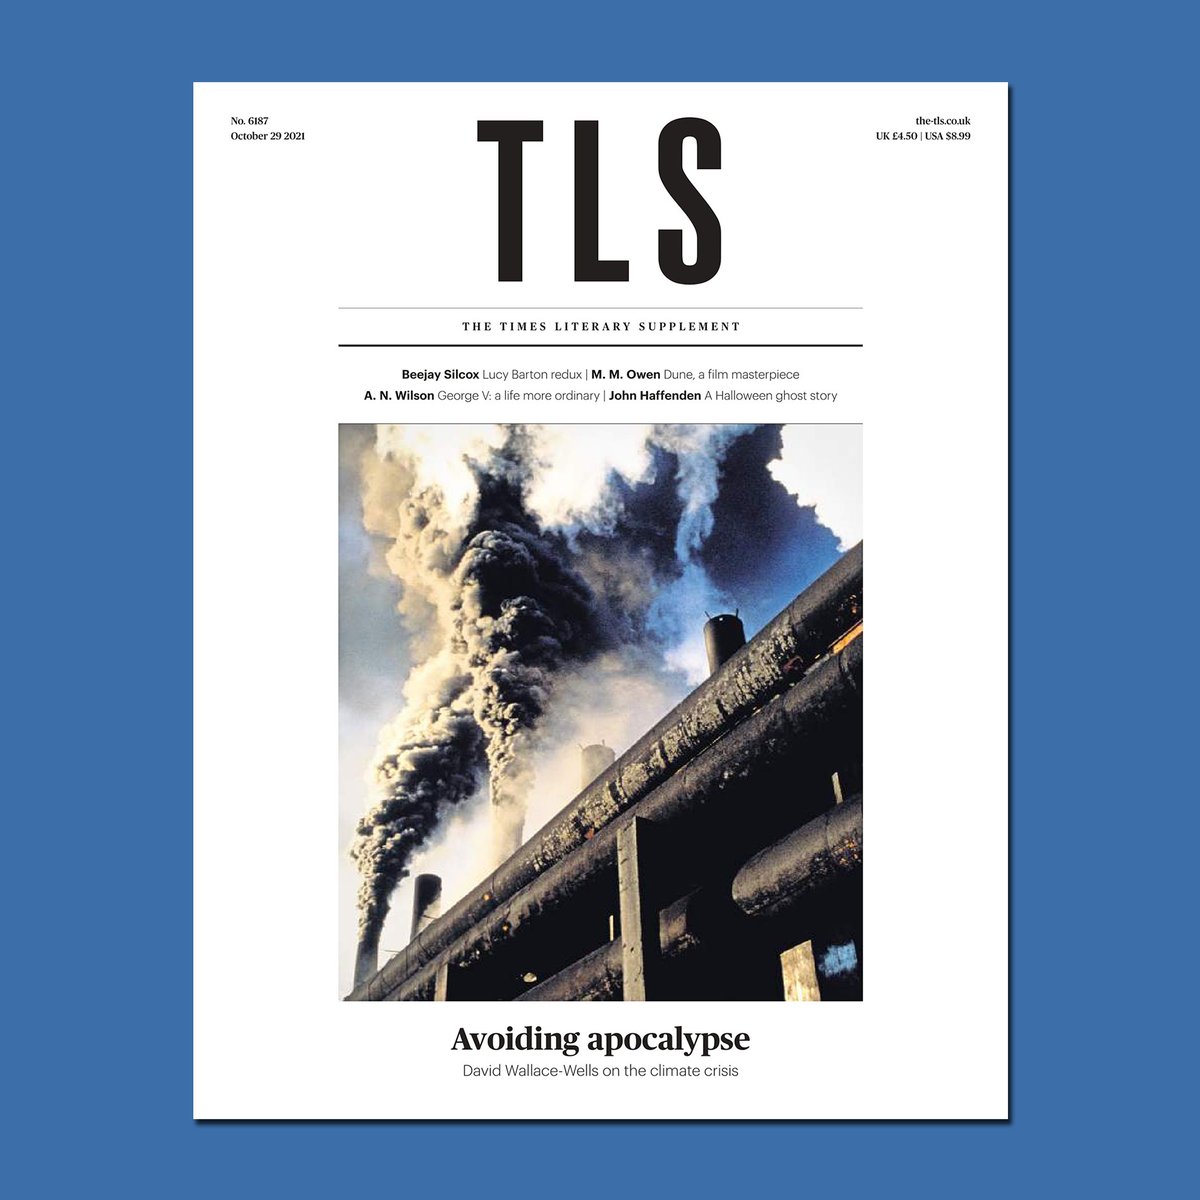 This week’s @TheTLS, featuring @dwallacewells on COP26 and how we approach climate change; @johnhaffenden on ‘The Boy in Pink’; @LuxMea on Antigone; @NatashaLehrer on Ruth Ozeki; @richardlea on Poe and science – and more